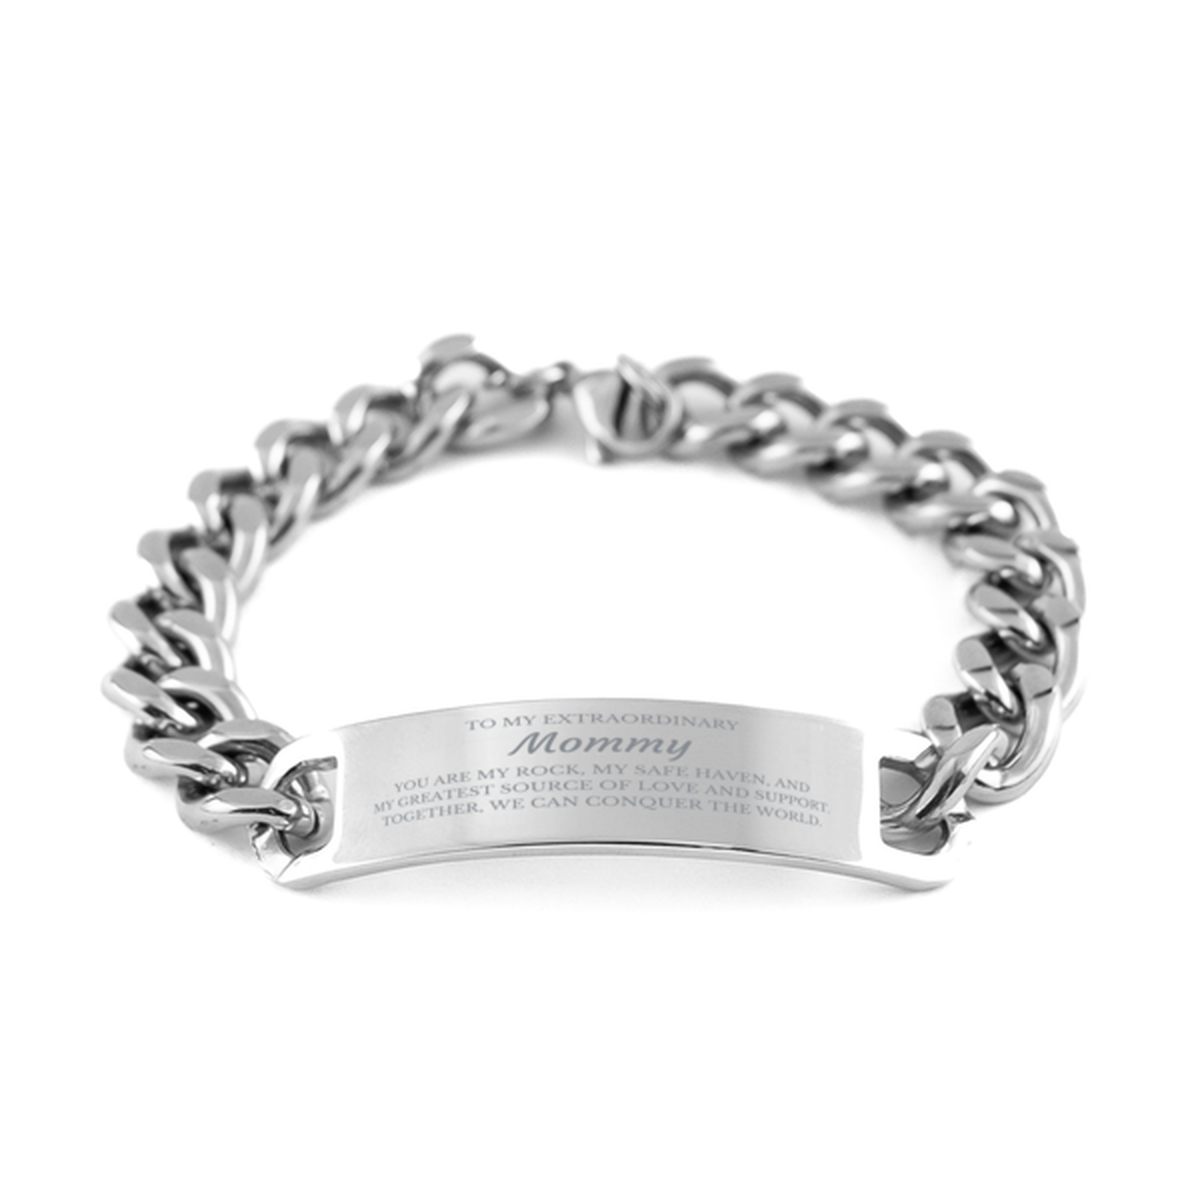 To My Extraordinary Mommy Gifts, Together, we can conquer the world, Birthday Cuban Chain Stainless Steel Bracelet For Mommy, Christmas Gifts For Mommy